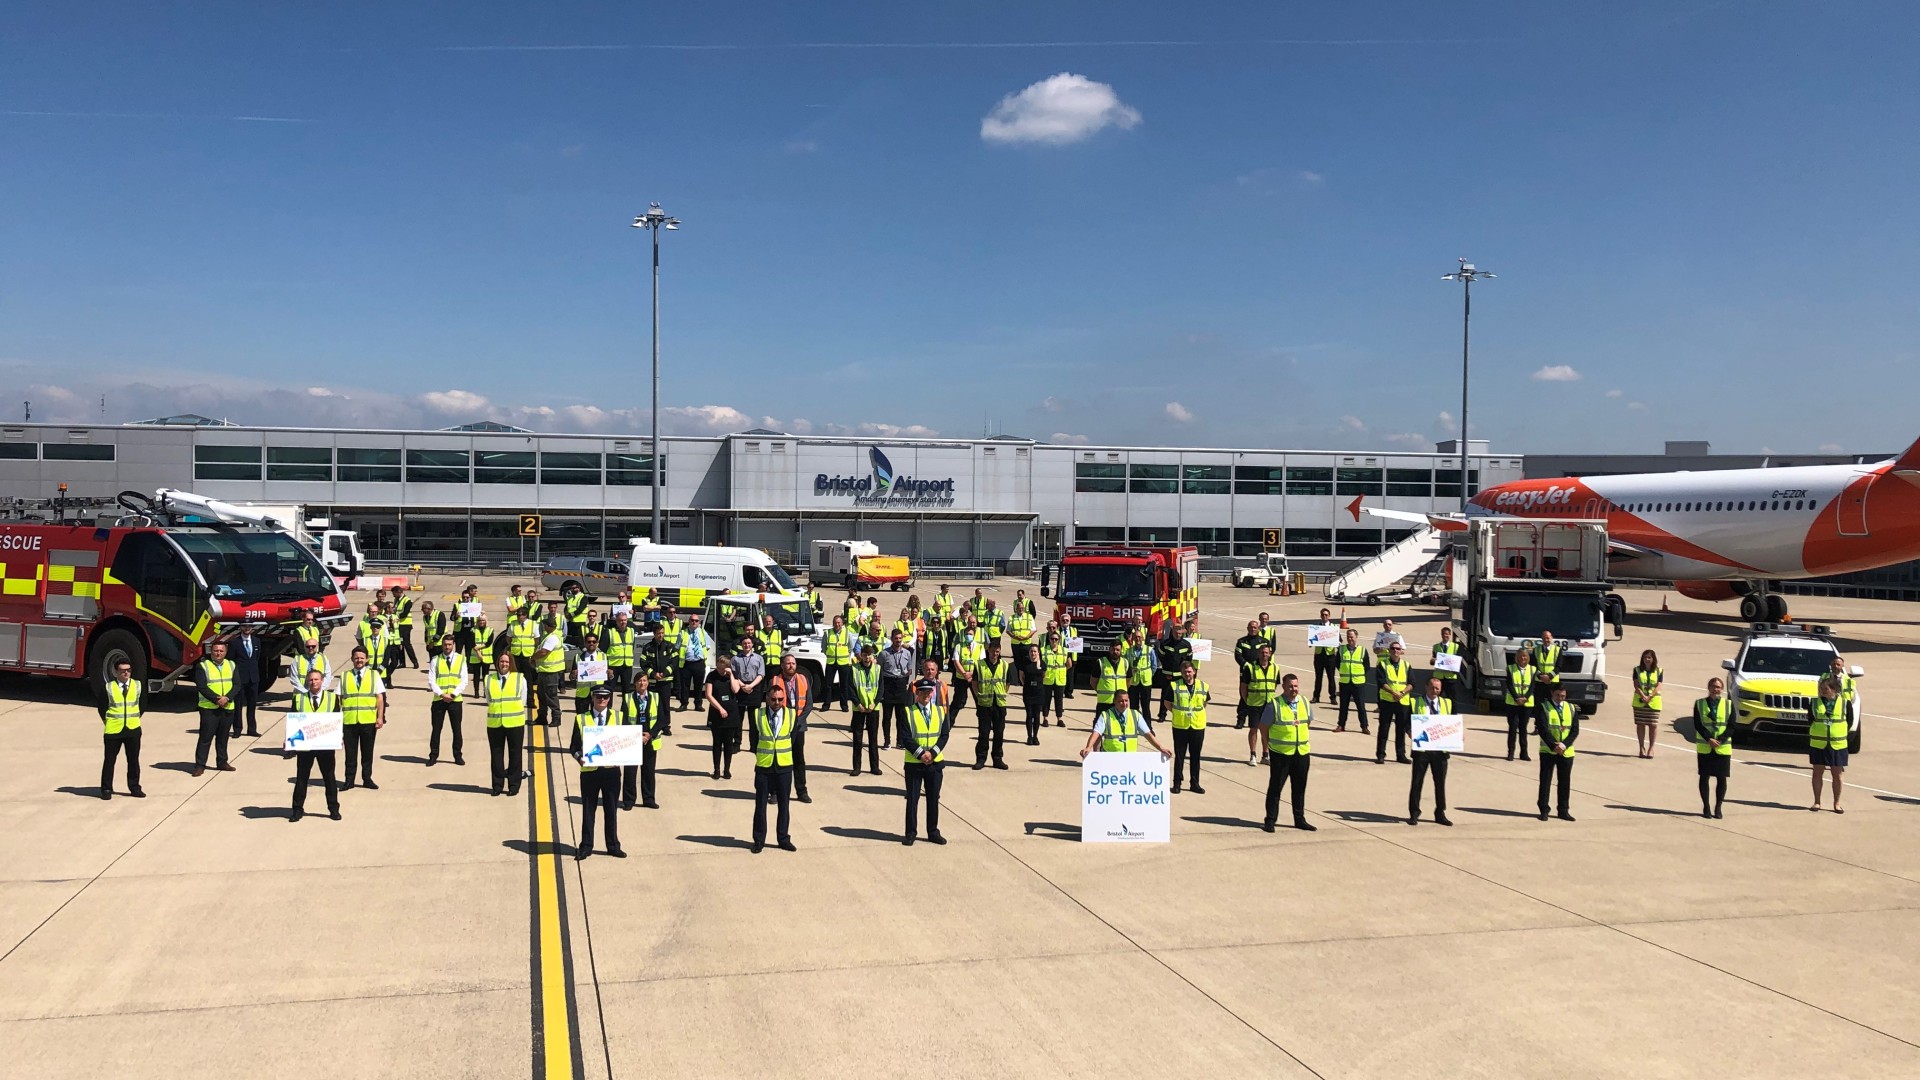  Staff from aviation and travel industries stand on Bristol Airport runway